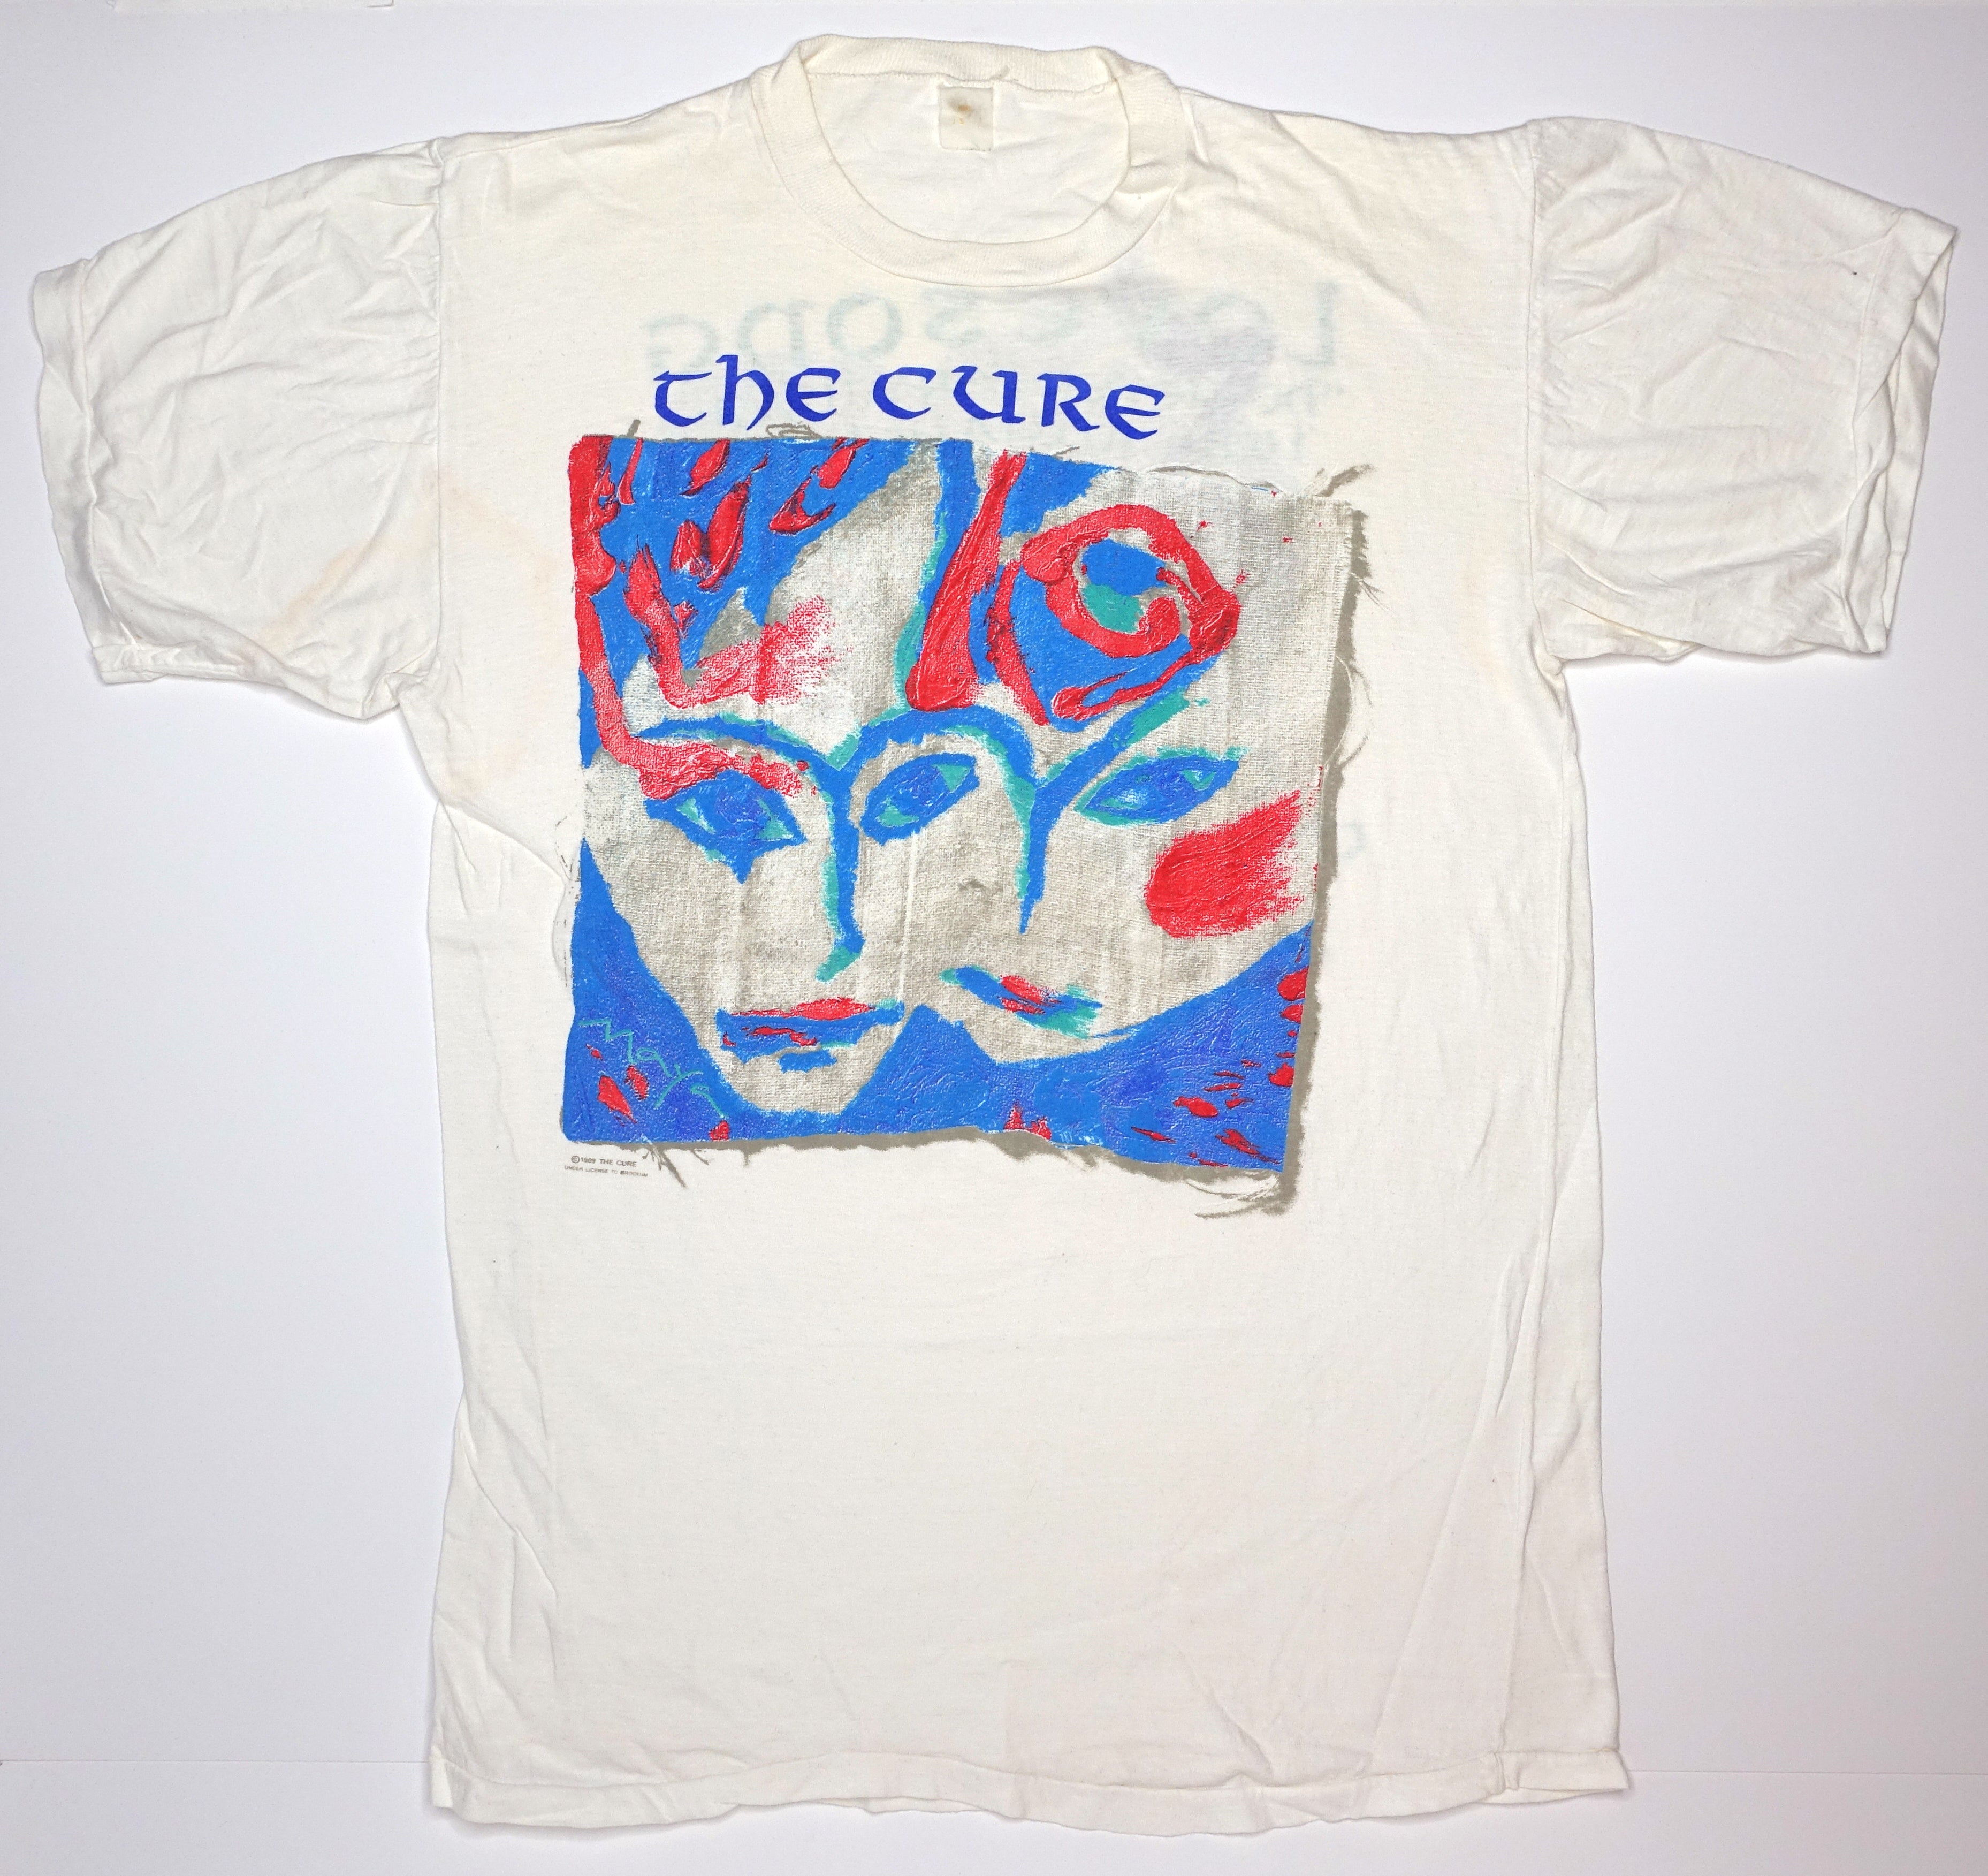 the Cure - Lovesong / Prayer 1989 Tour Shirt Size Large